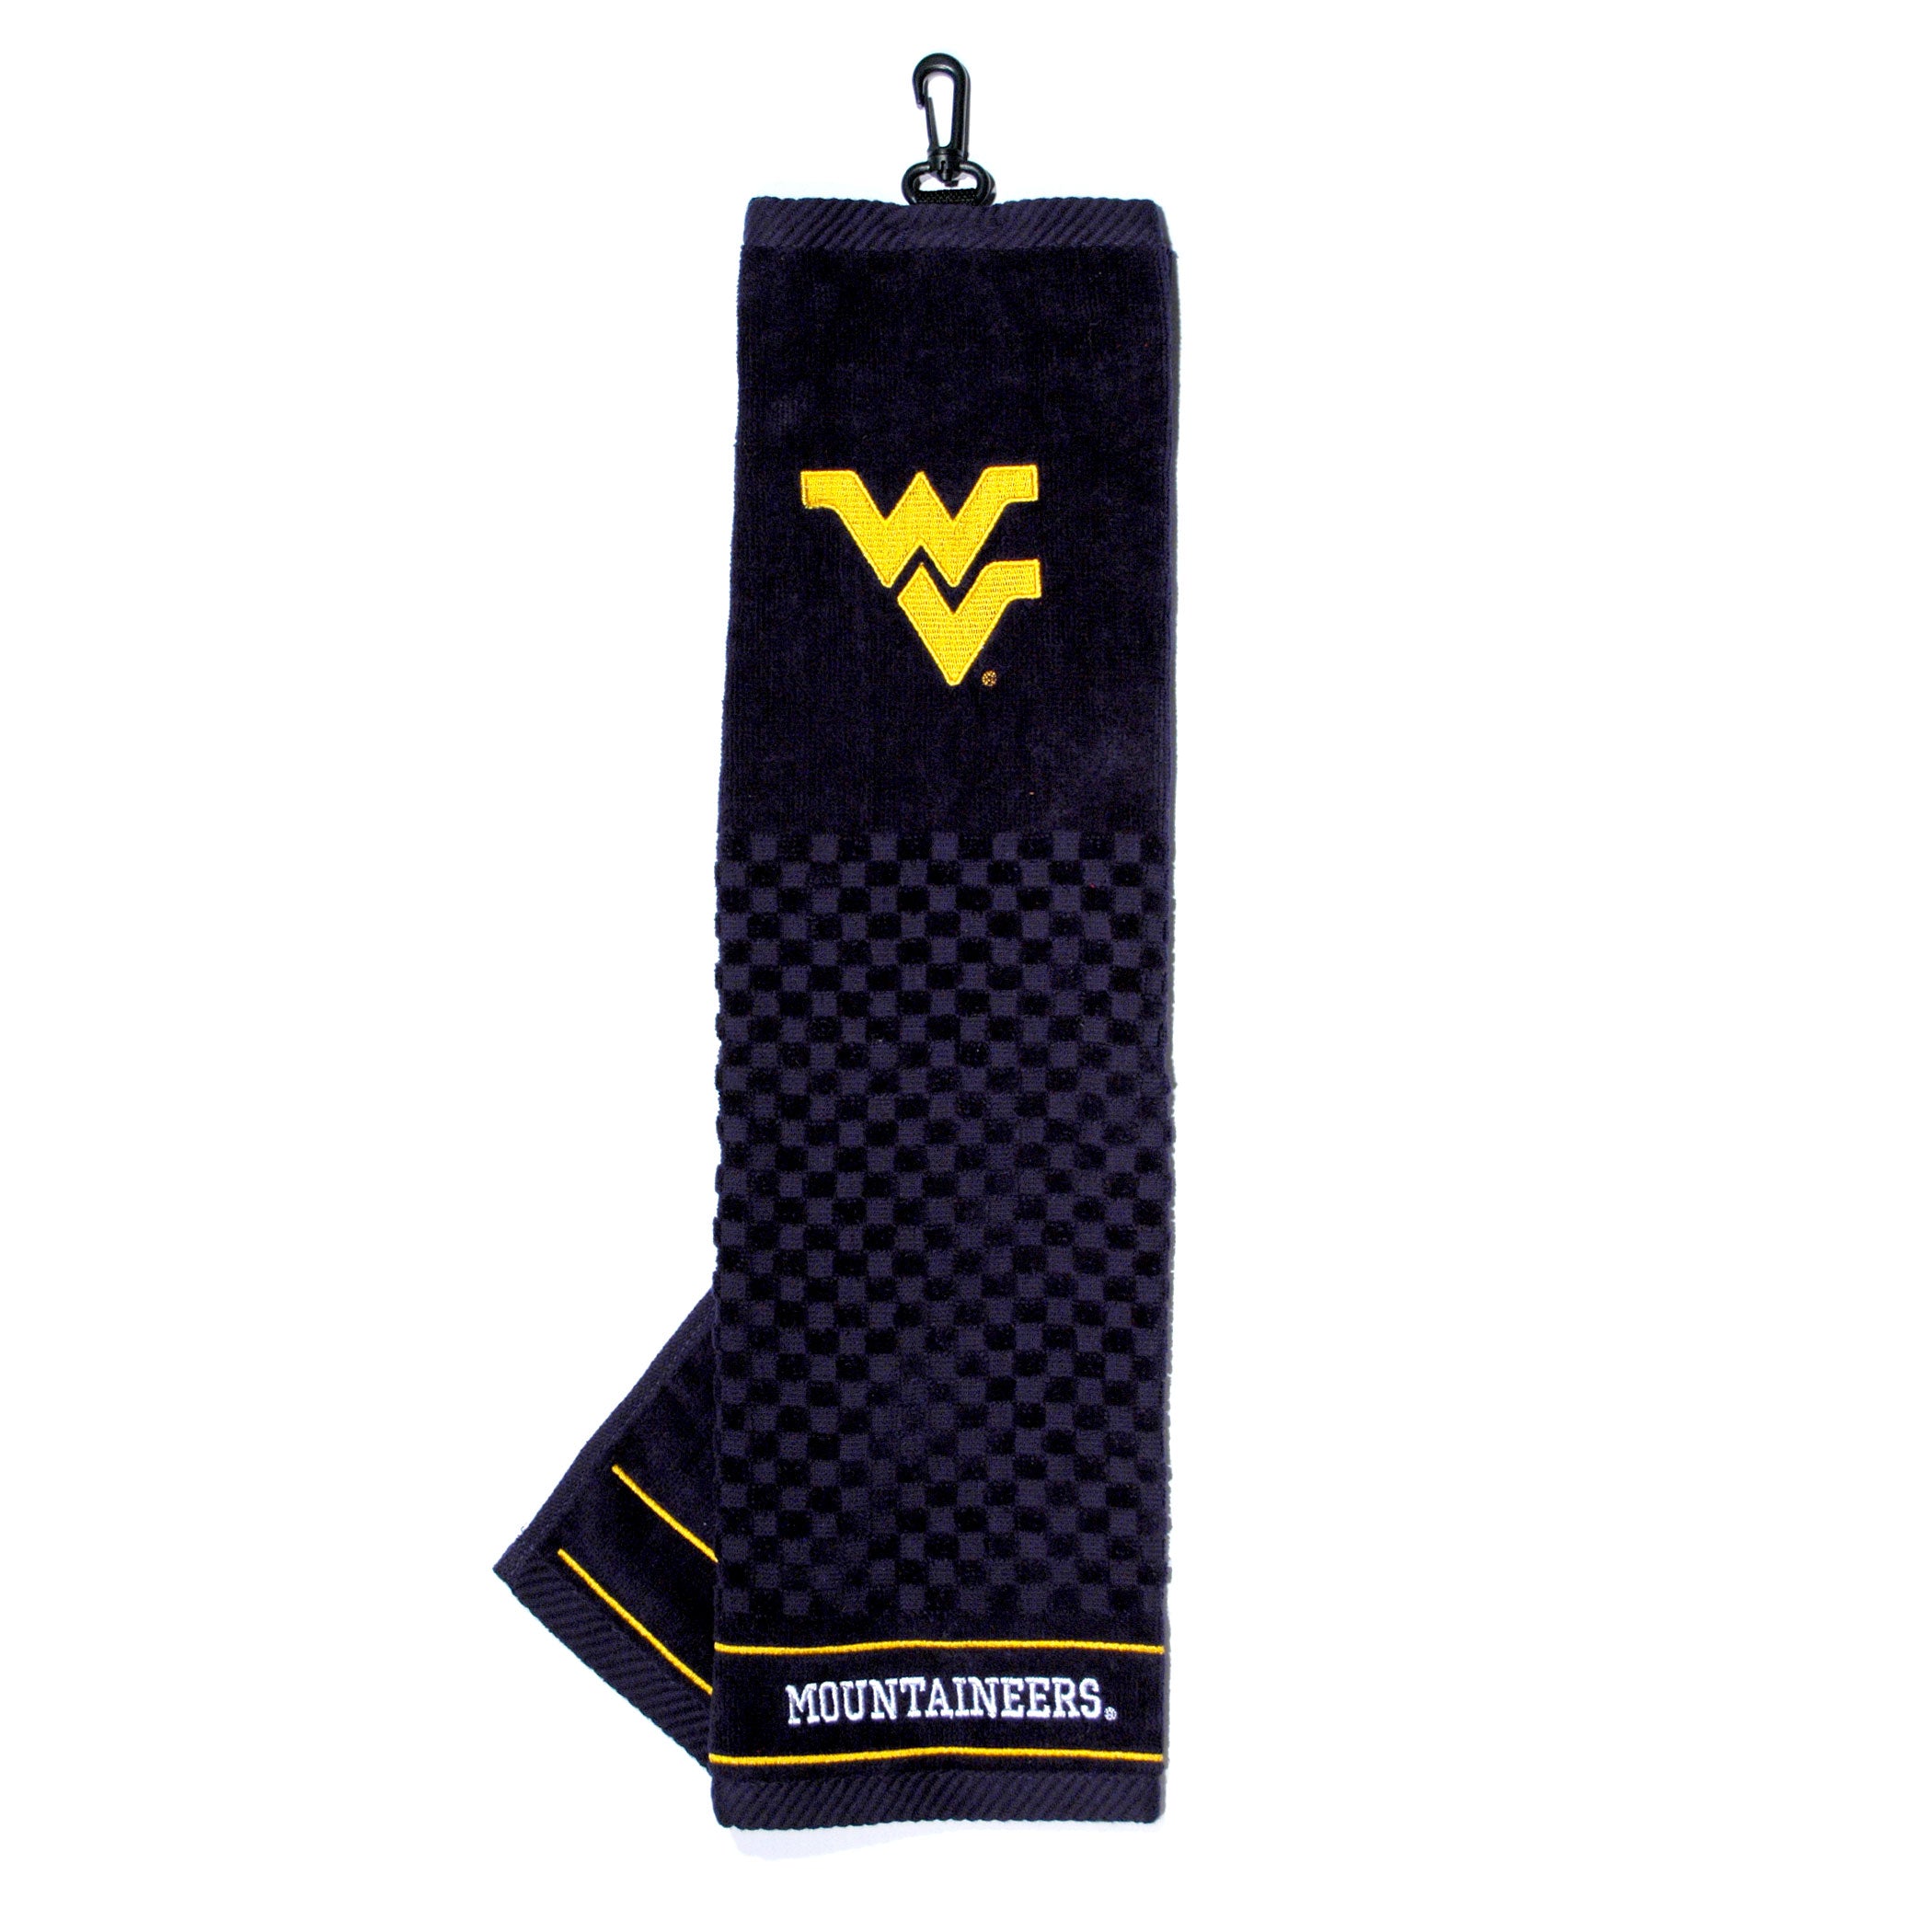 West Virginia Mountaineers Embroidered Towel